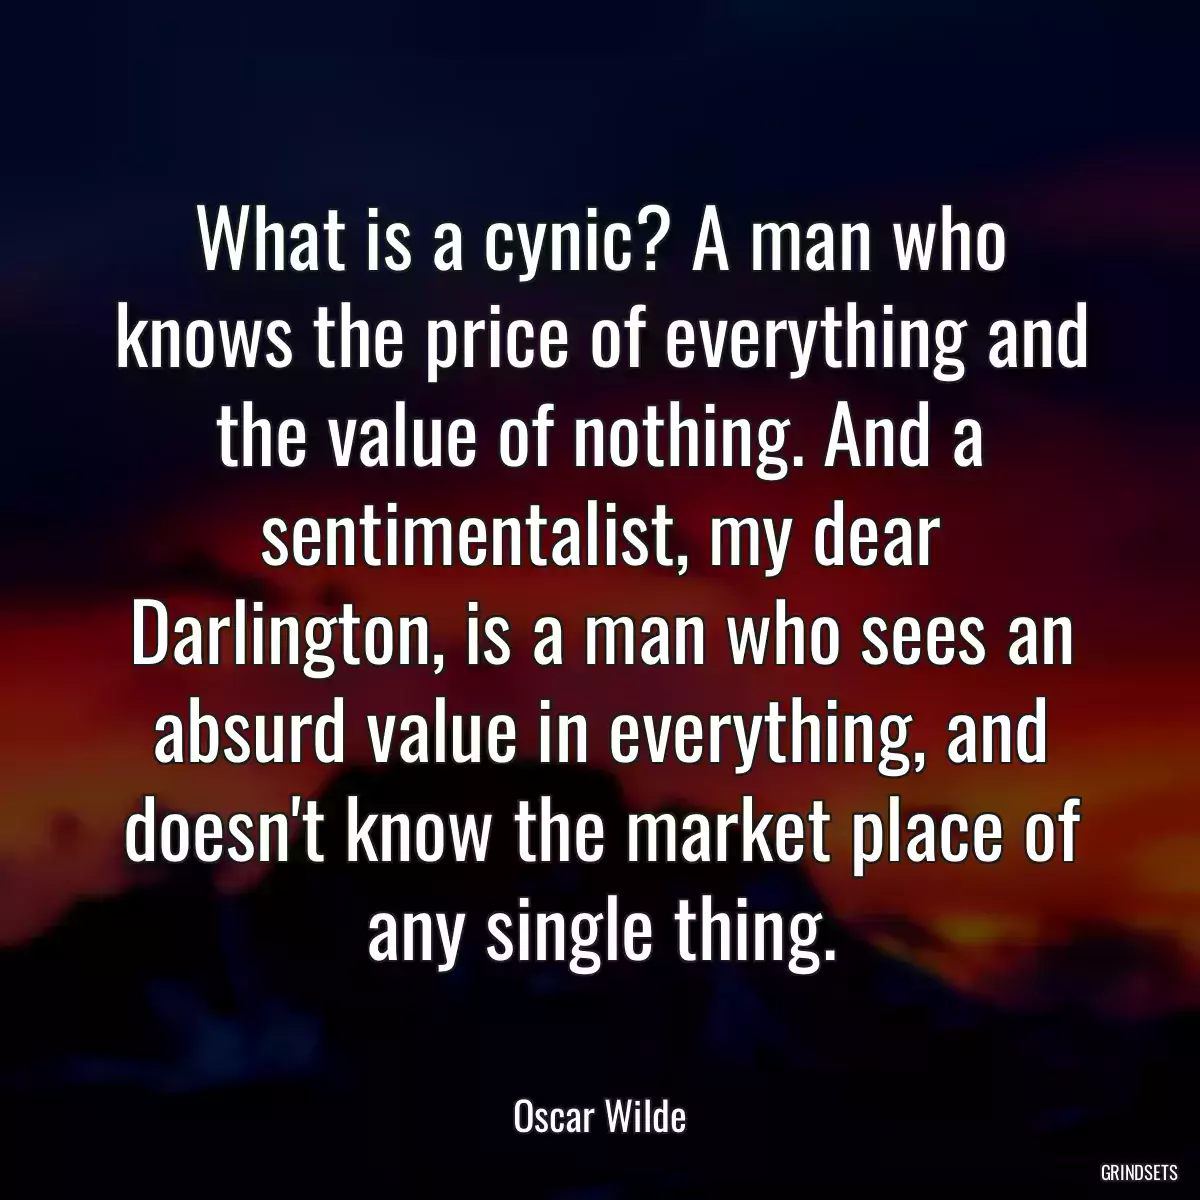 What is a cynic? A man who knows the price of everything and the value of nothing. And a sentimentalist, my dear Darlington, is a man who sees an absurd value in everything, and doesn\'t know the market place of any single thing.